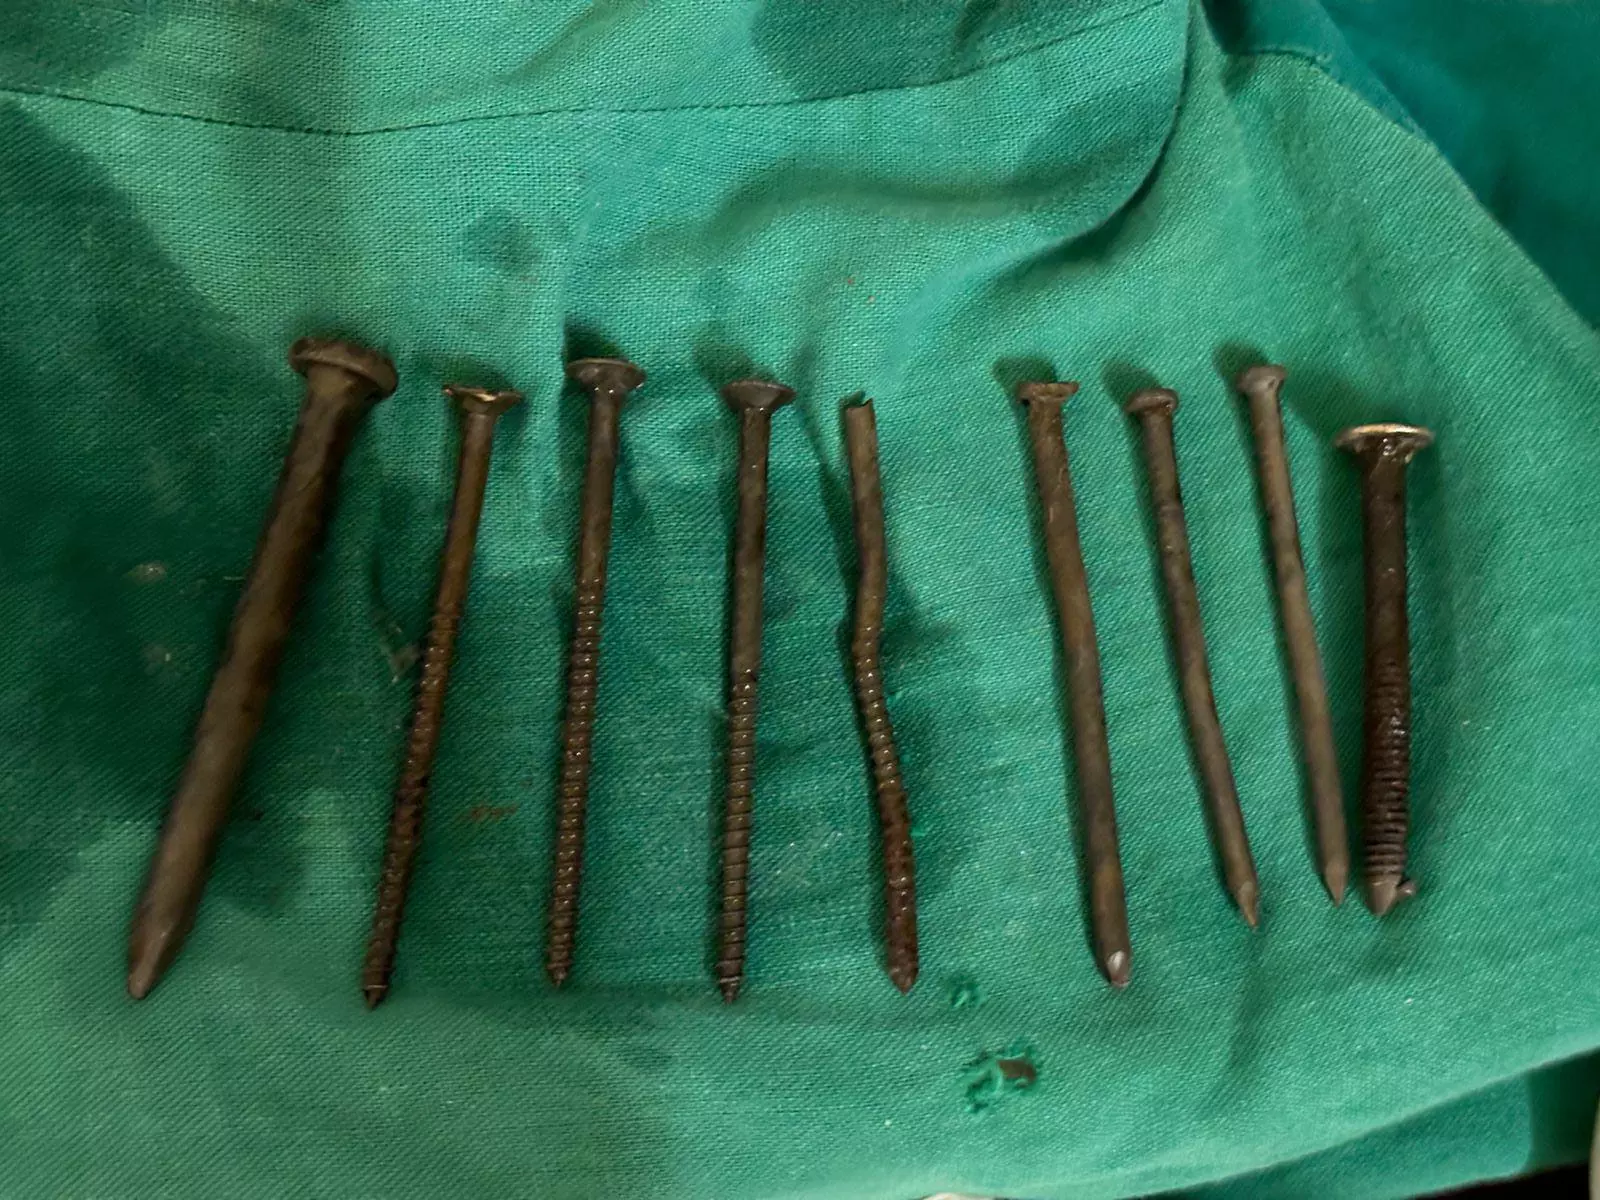 Doctors remove 9 iron nails from Cherlapally remand prisoner’s stomach